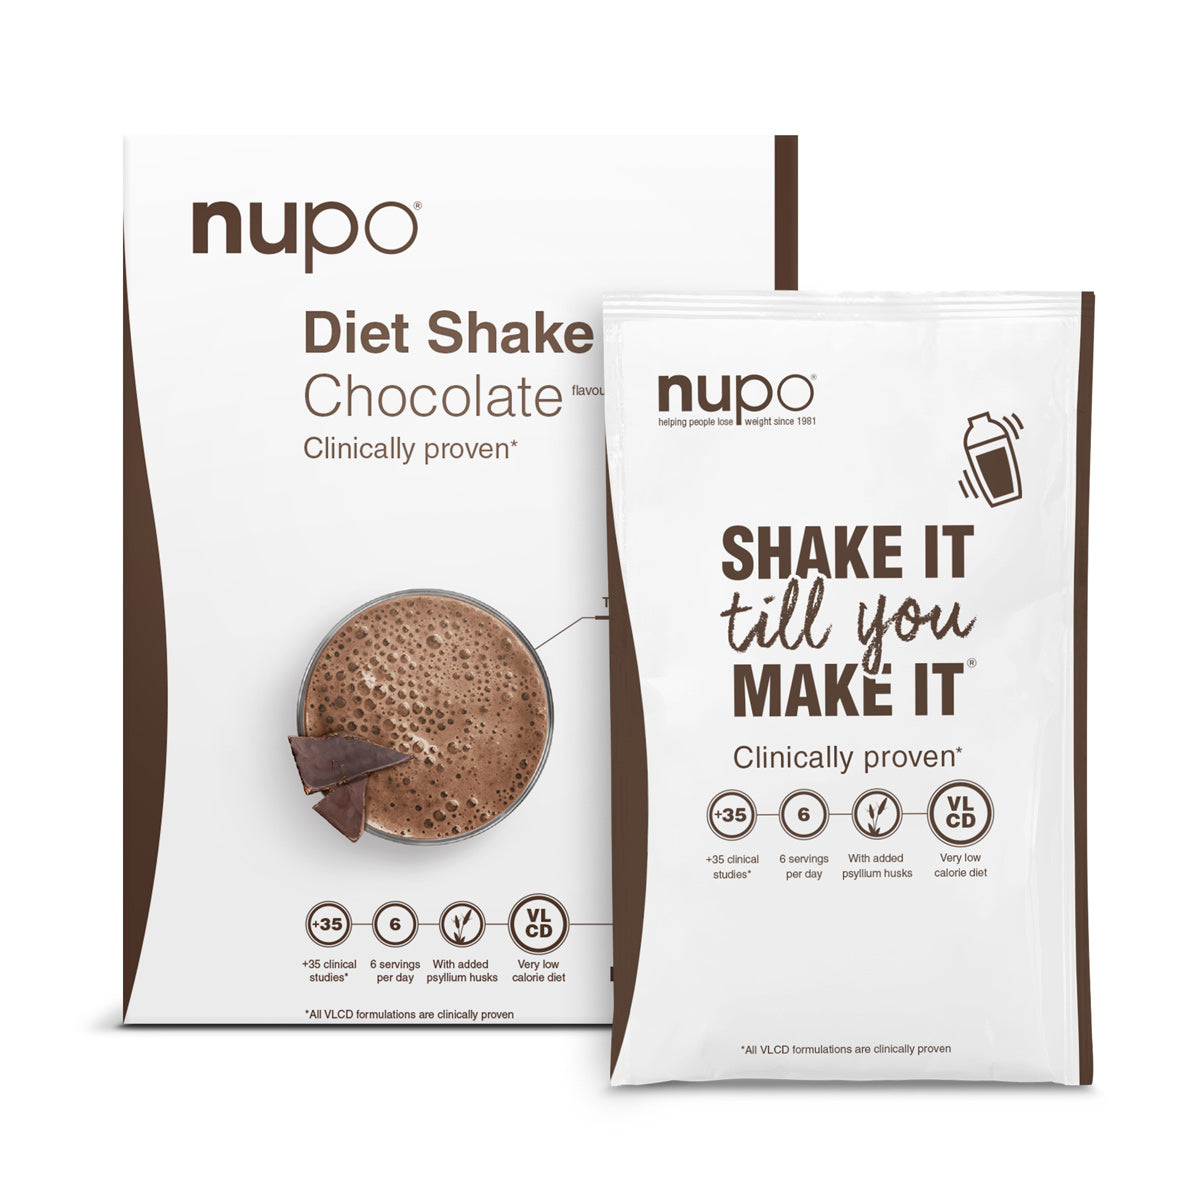 Se Nupo Diet Shake (384g) - Chocolate hos Muscle House